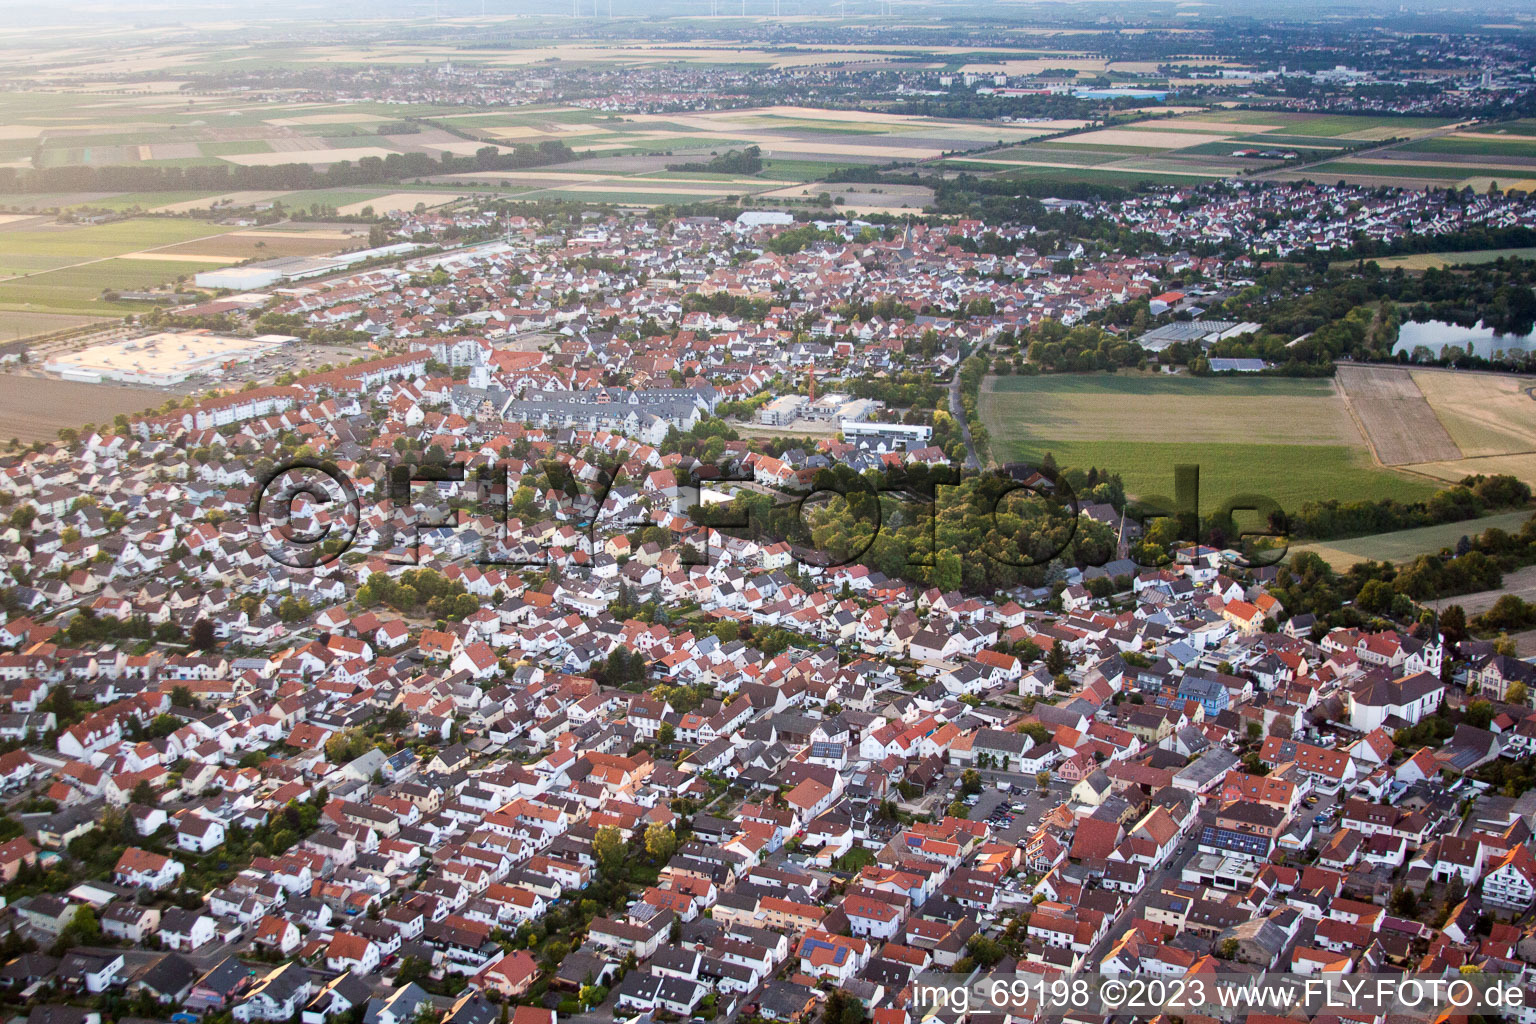 City view of the city area of in the district Roxheim in Bobenheim-Roxheim in the state Rhineland-Palatinate viewn from the air